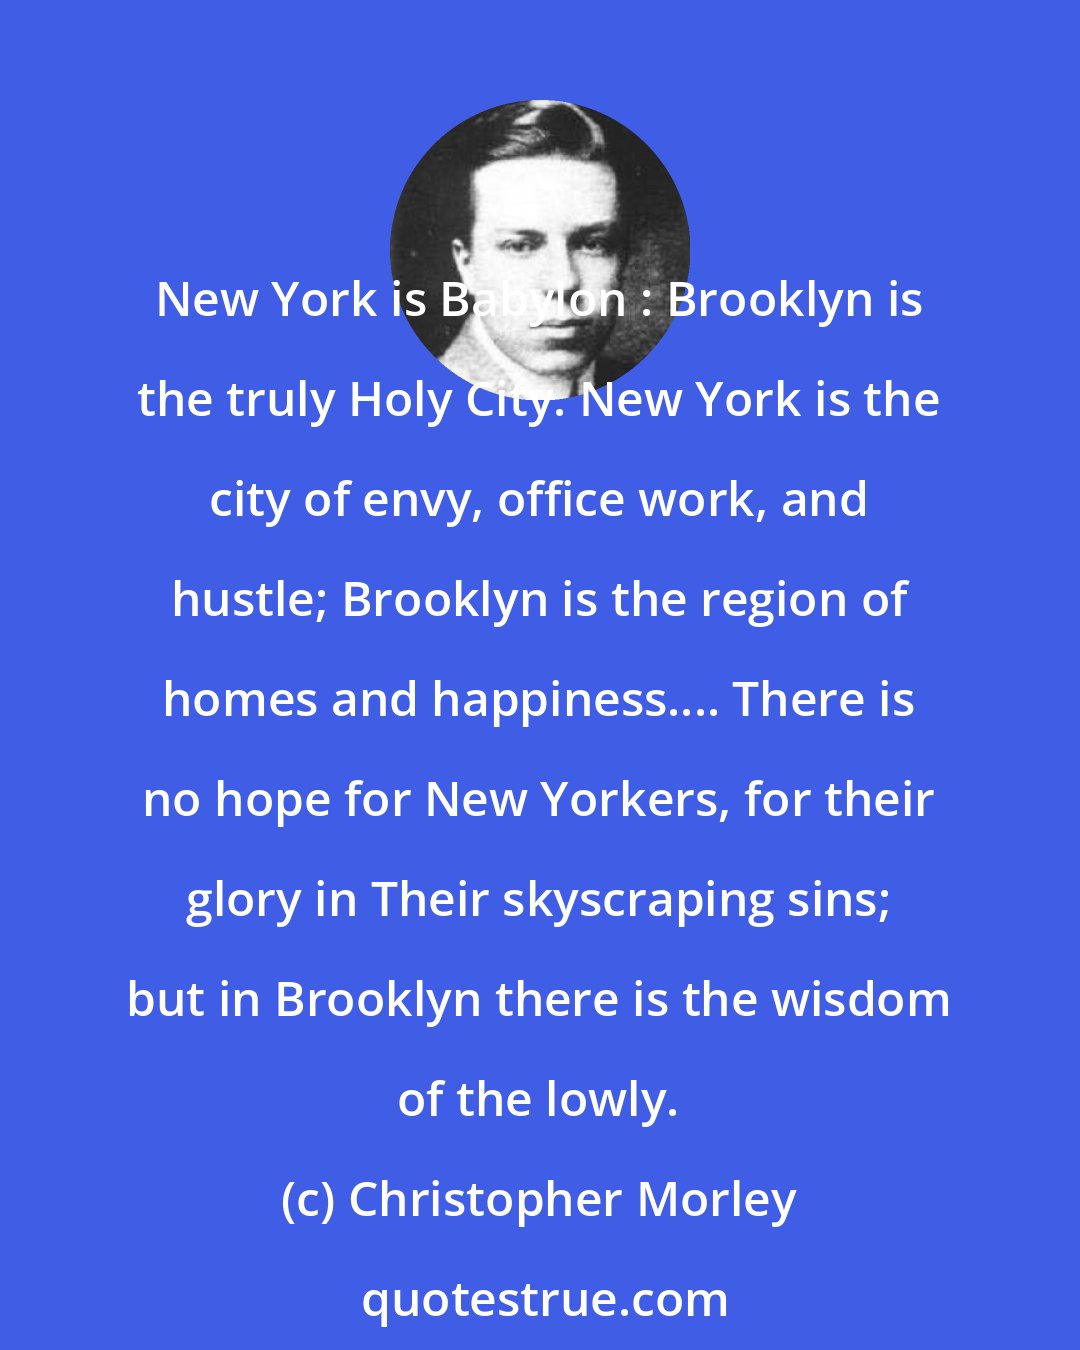 Christopher Morley: New York is Babylon : Brooklyn is the truly Holy City. New York is the city of envy, office work, and hustle; Brooklyn is the region of homes and happiness.... There is no hope for New Yorkers, for their glory in Their skyscraping sins; but in Brooklyn there is the wisdom of the lowly.